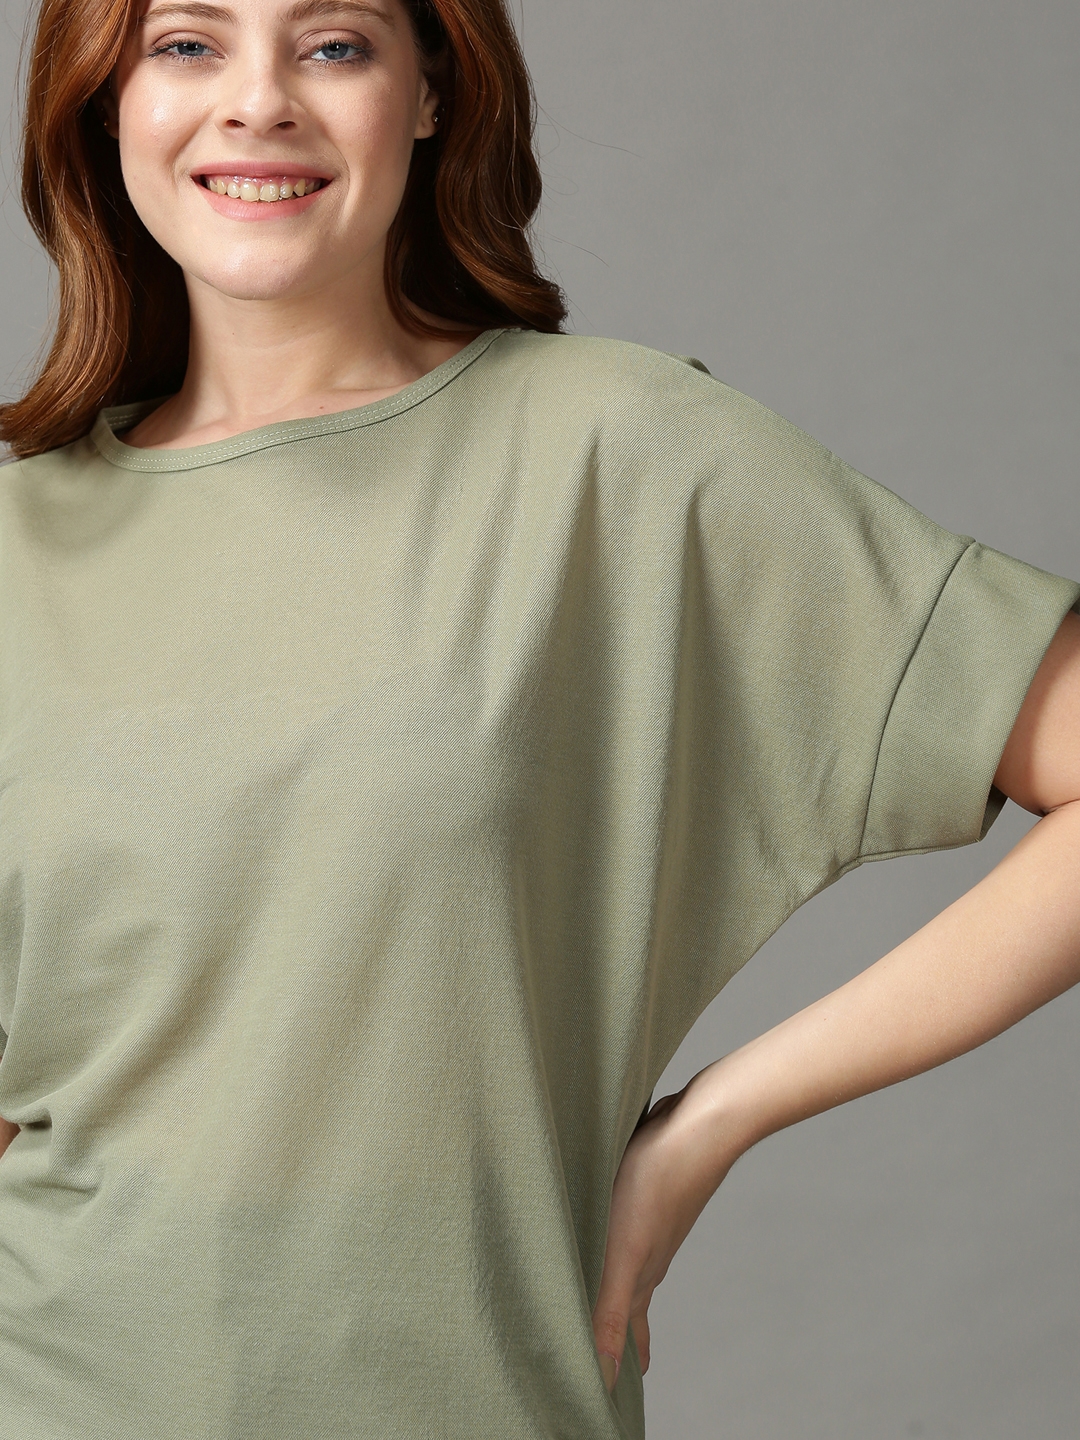 Women's Green Polycotton Solid Tops